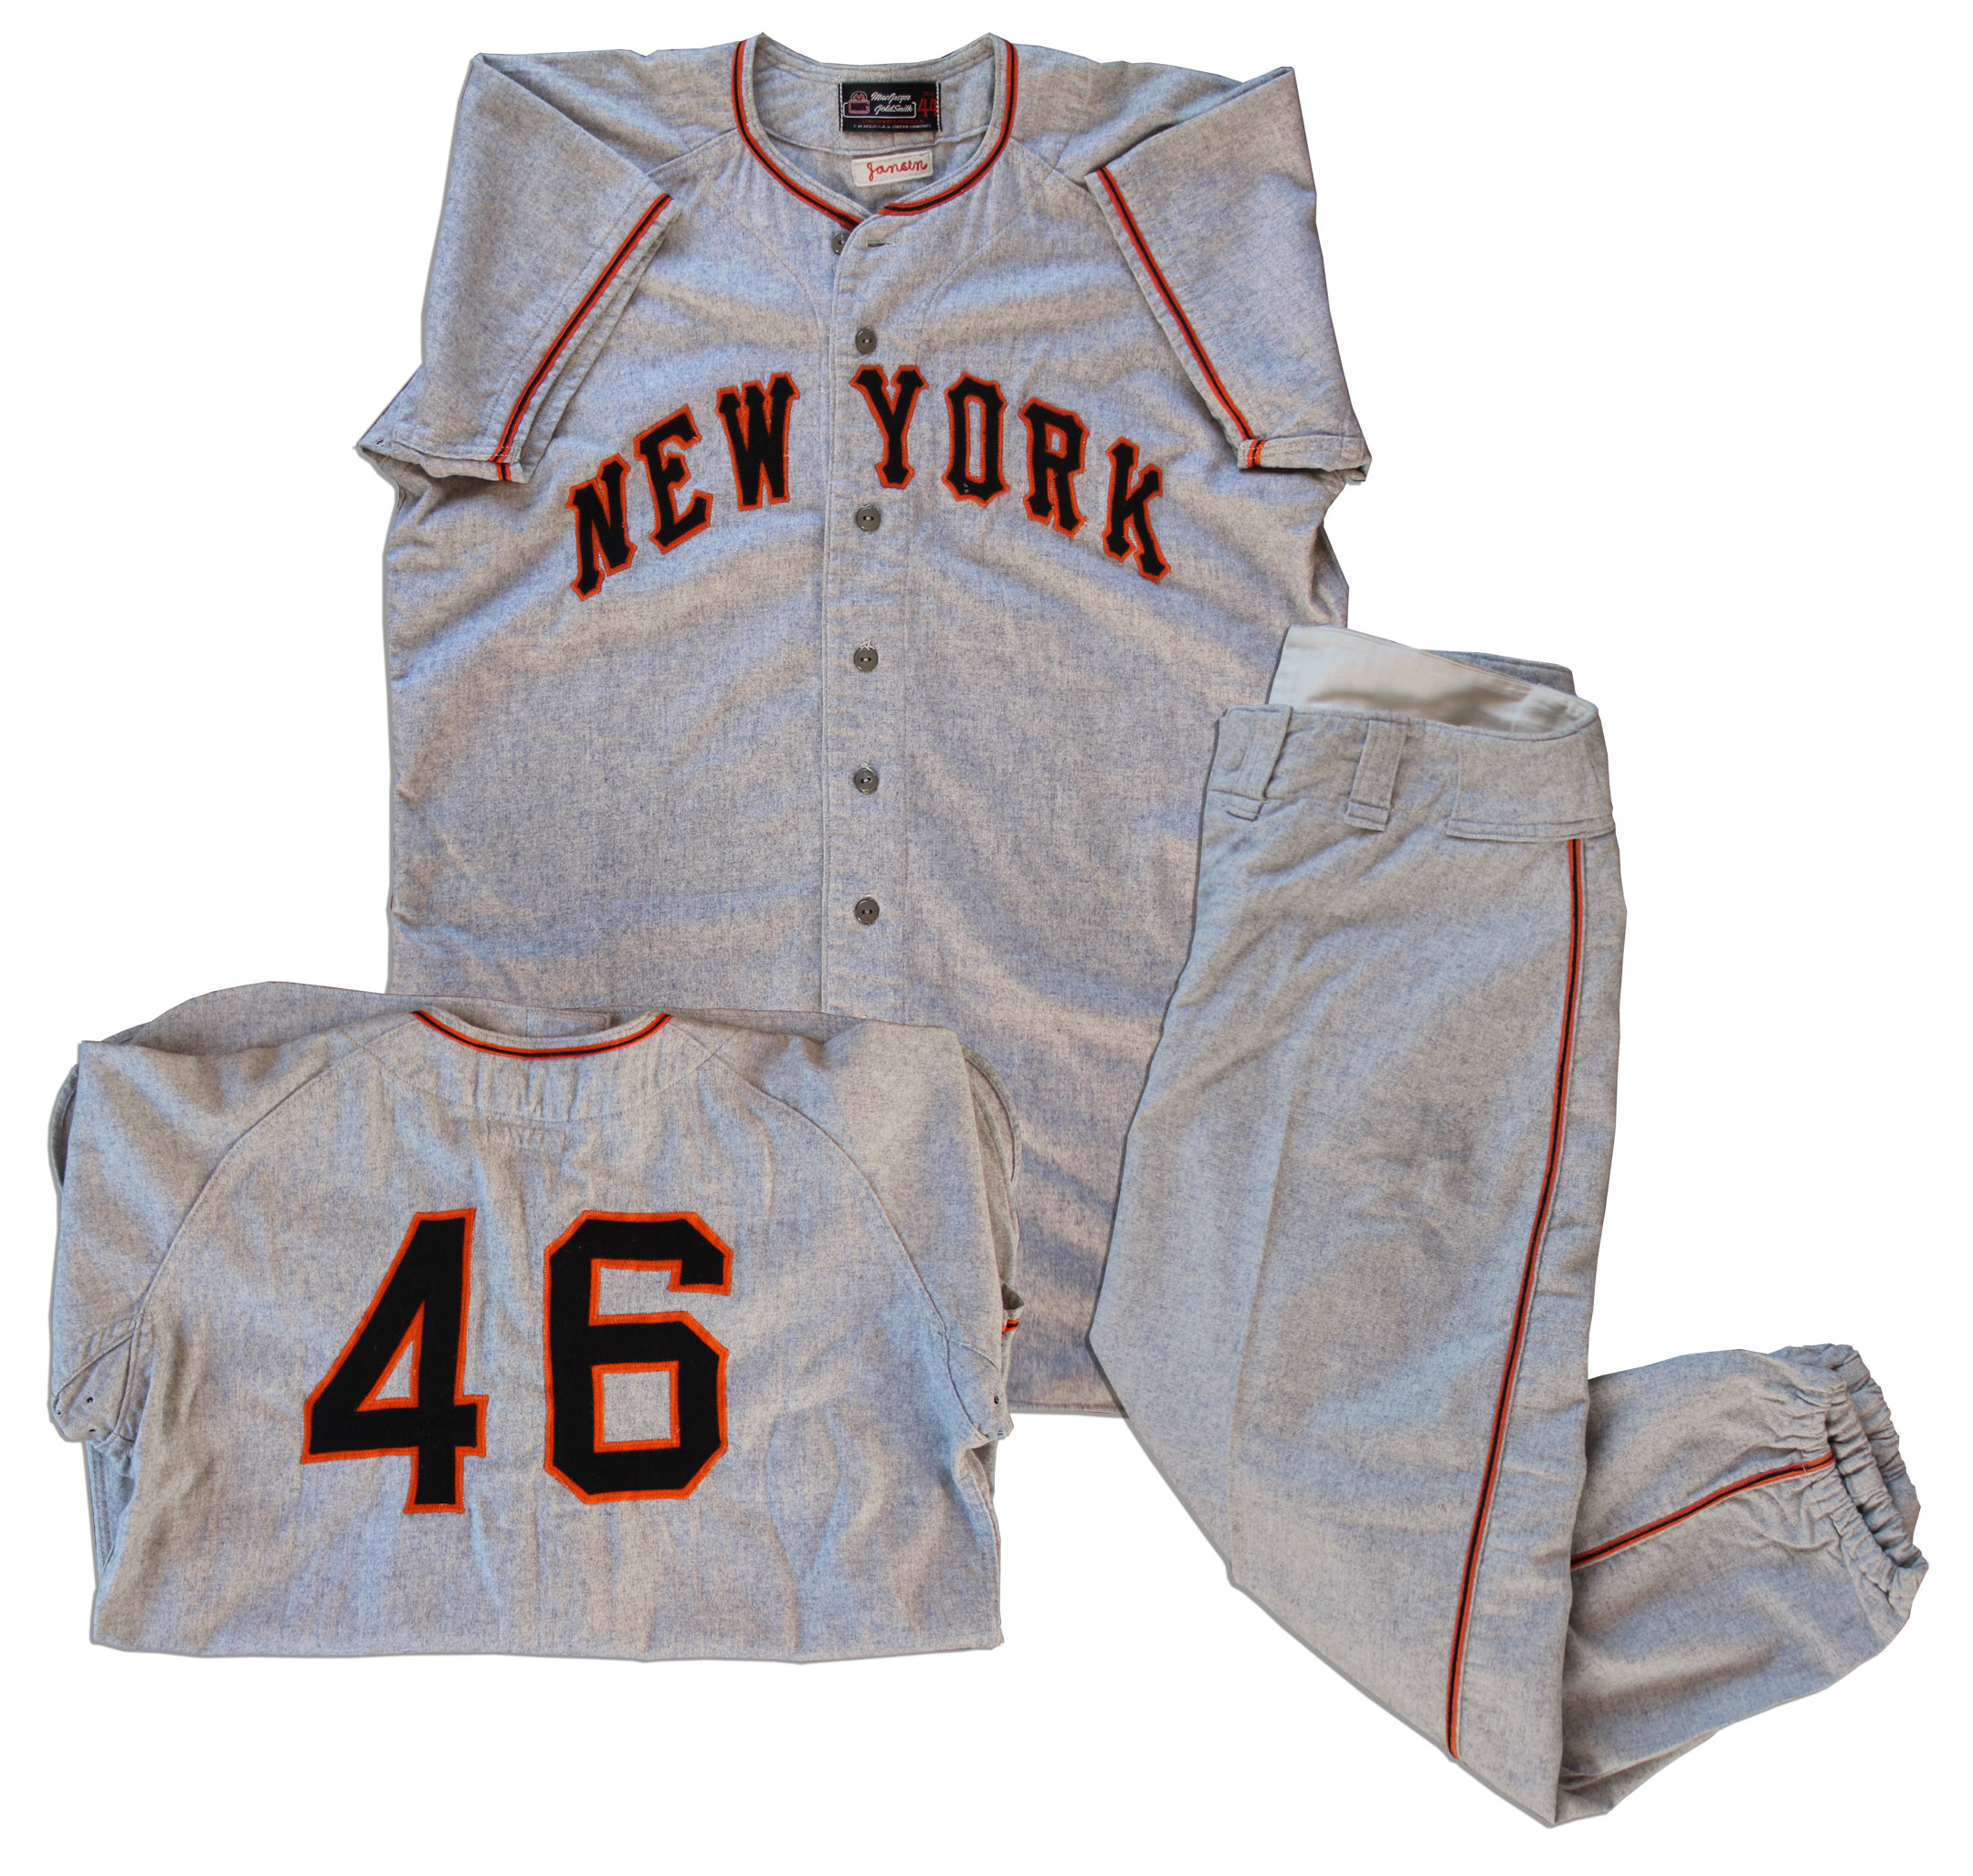 Sell or Auction Your Willie Mays 1966 San Francisco Giants Uniform Pants